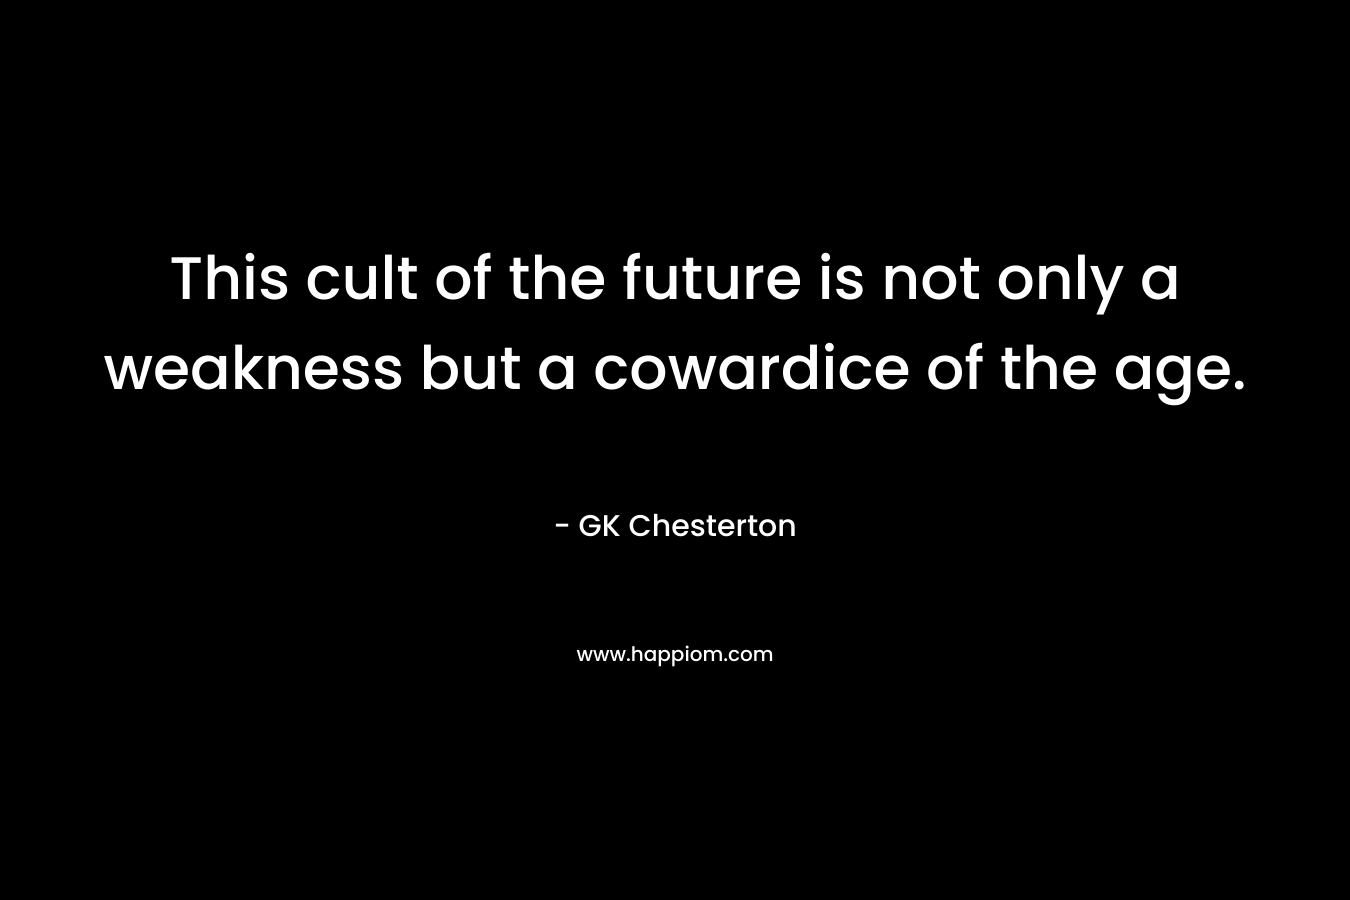 This cult of the future is not only a weakness but a cowardice of the age.